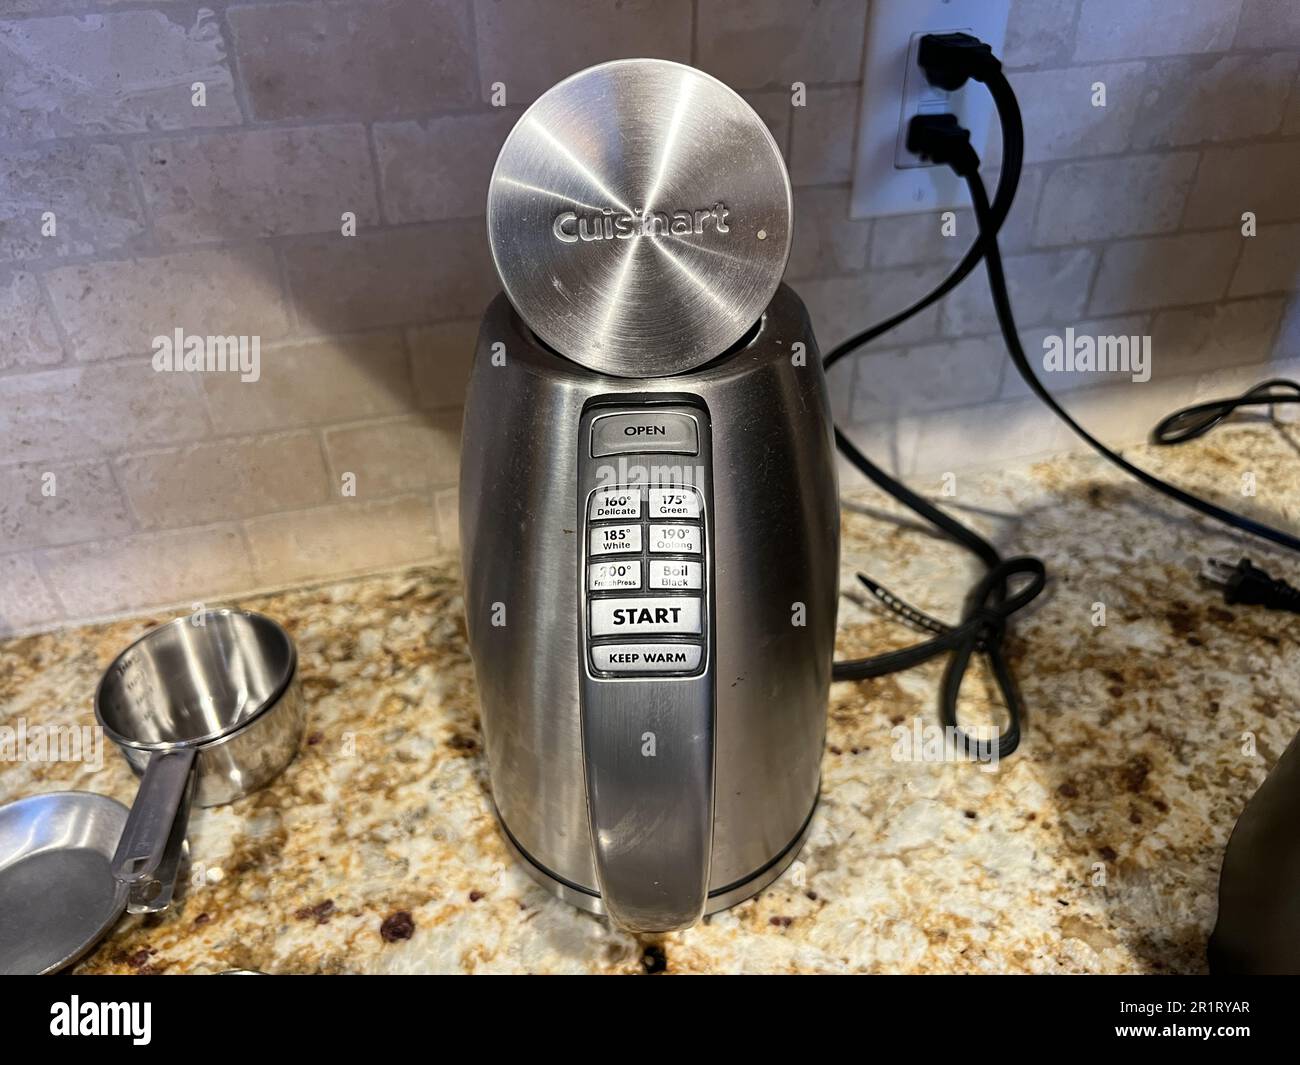 https://c8.alamy.com/comp/2R1RYAR/united-states-17th-june-2022-cuisinart-perfectemp-smart-electric-kettle-in-a-kitchen-setting-in-truckee-california-june-17-2022-photo-courtesy-sftm-photo-by-gadosipa-usa-credit-sipa-usaalamy-live-news-2R1RYAR.jpg